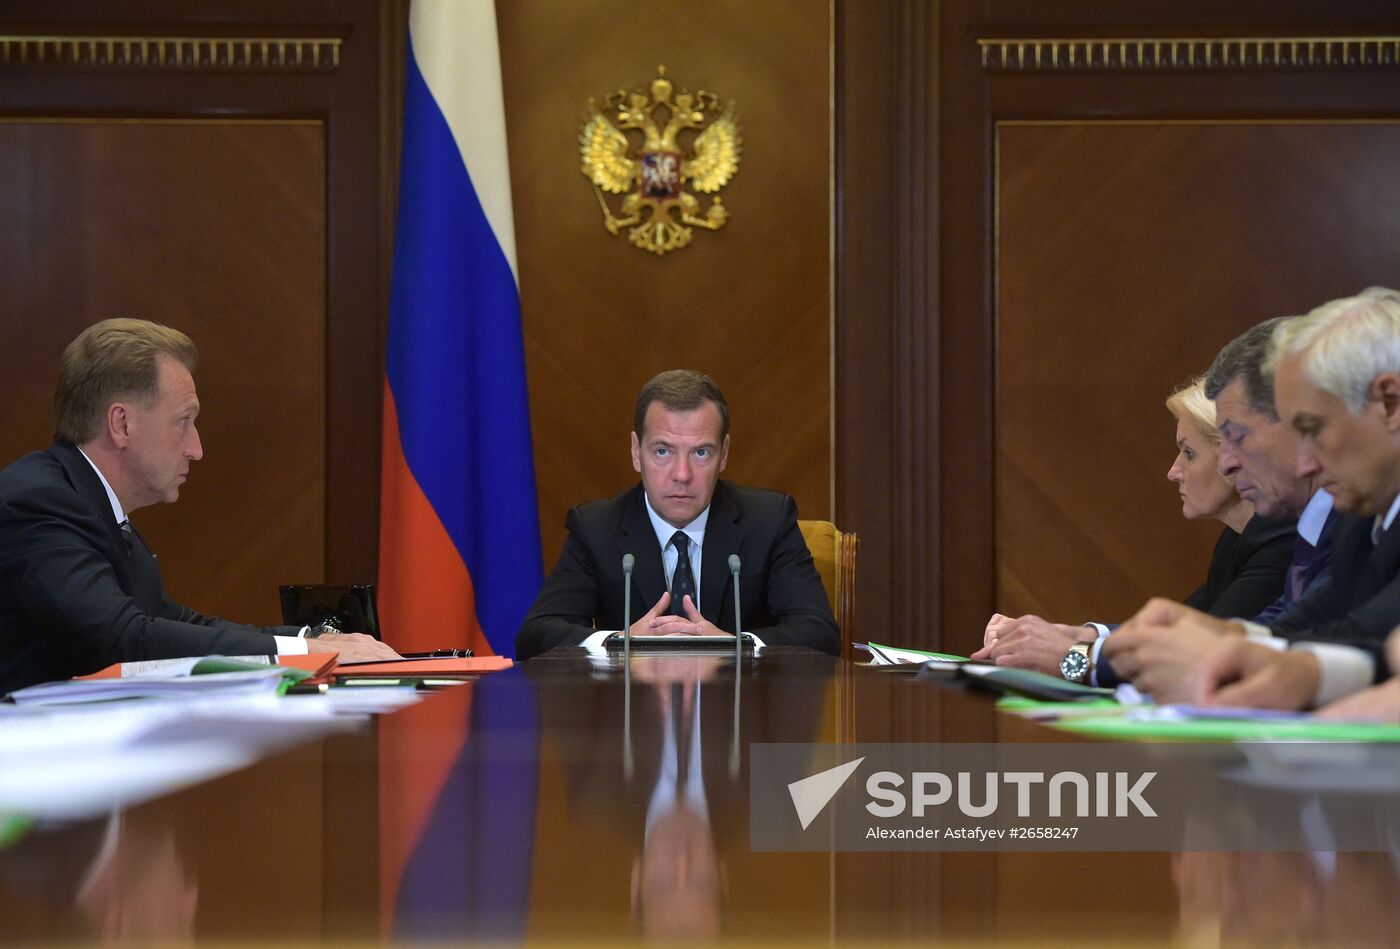 Prime Minister Dmitry Medvedev's meeting on economy and social stability